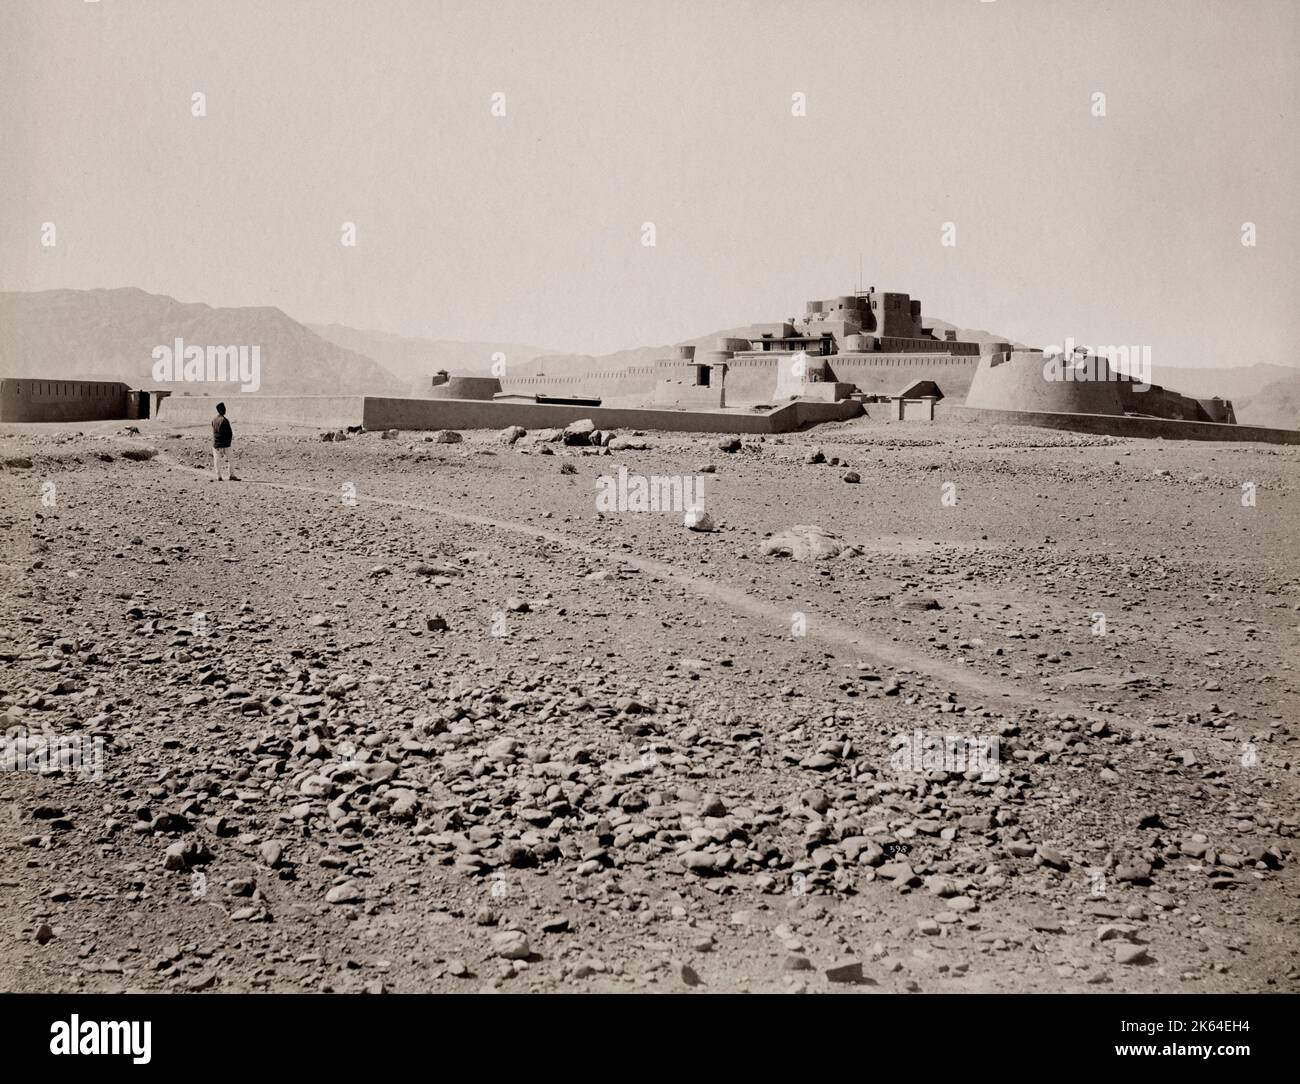 19th century vintage photograph: The Jamrud Fort is located beside Bab-e-Khyber at the entrance to the Khyber Pass from the Peshawar side in the tribal district of Khyber KPK, Pakistan. (British India) Image c.1890's-1900 Stock Photo